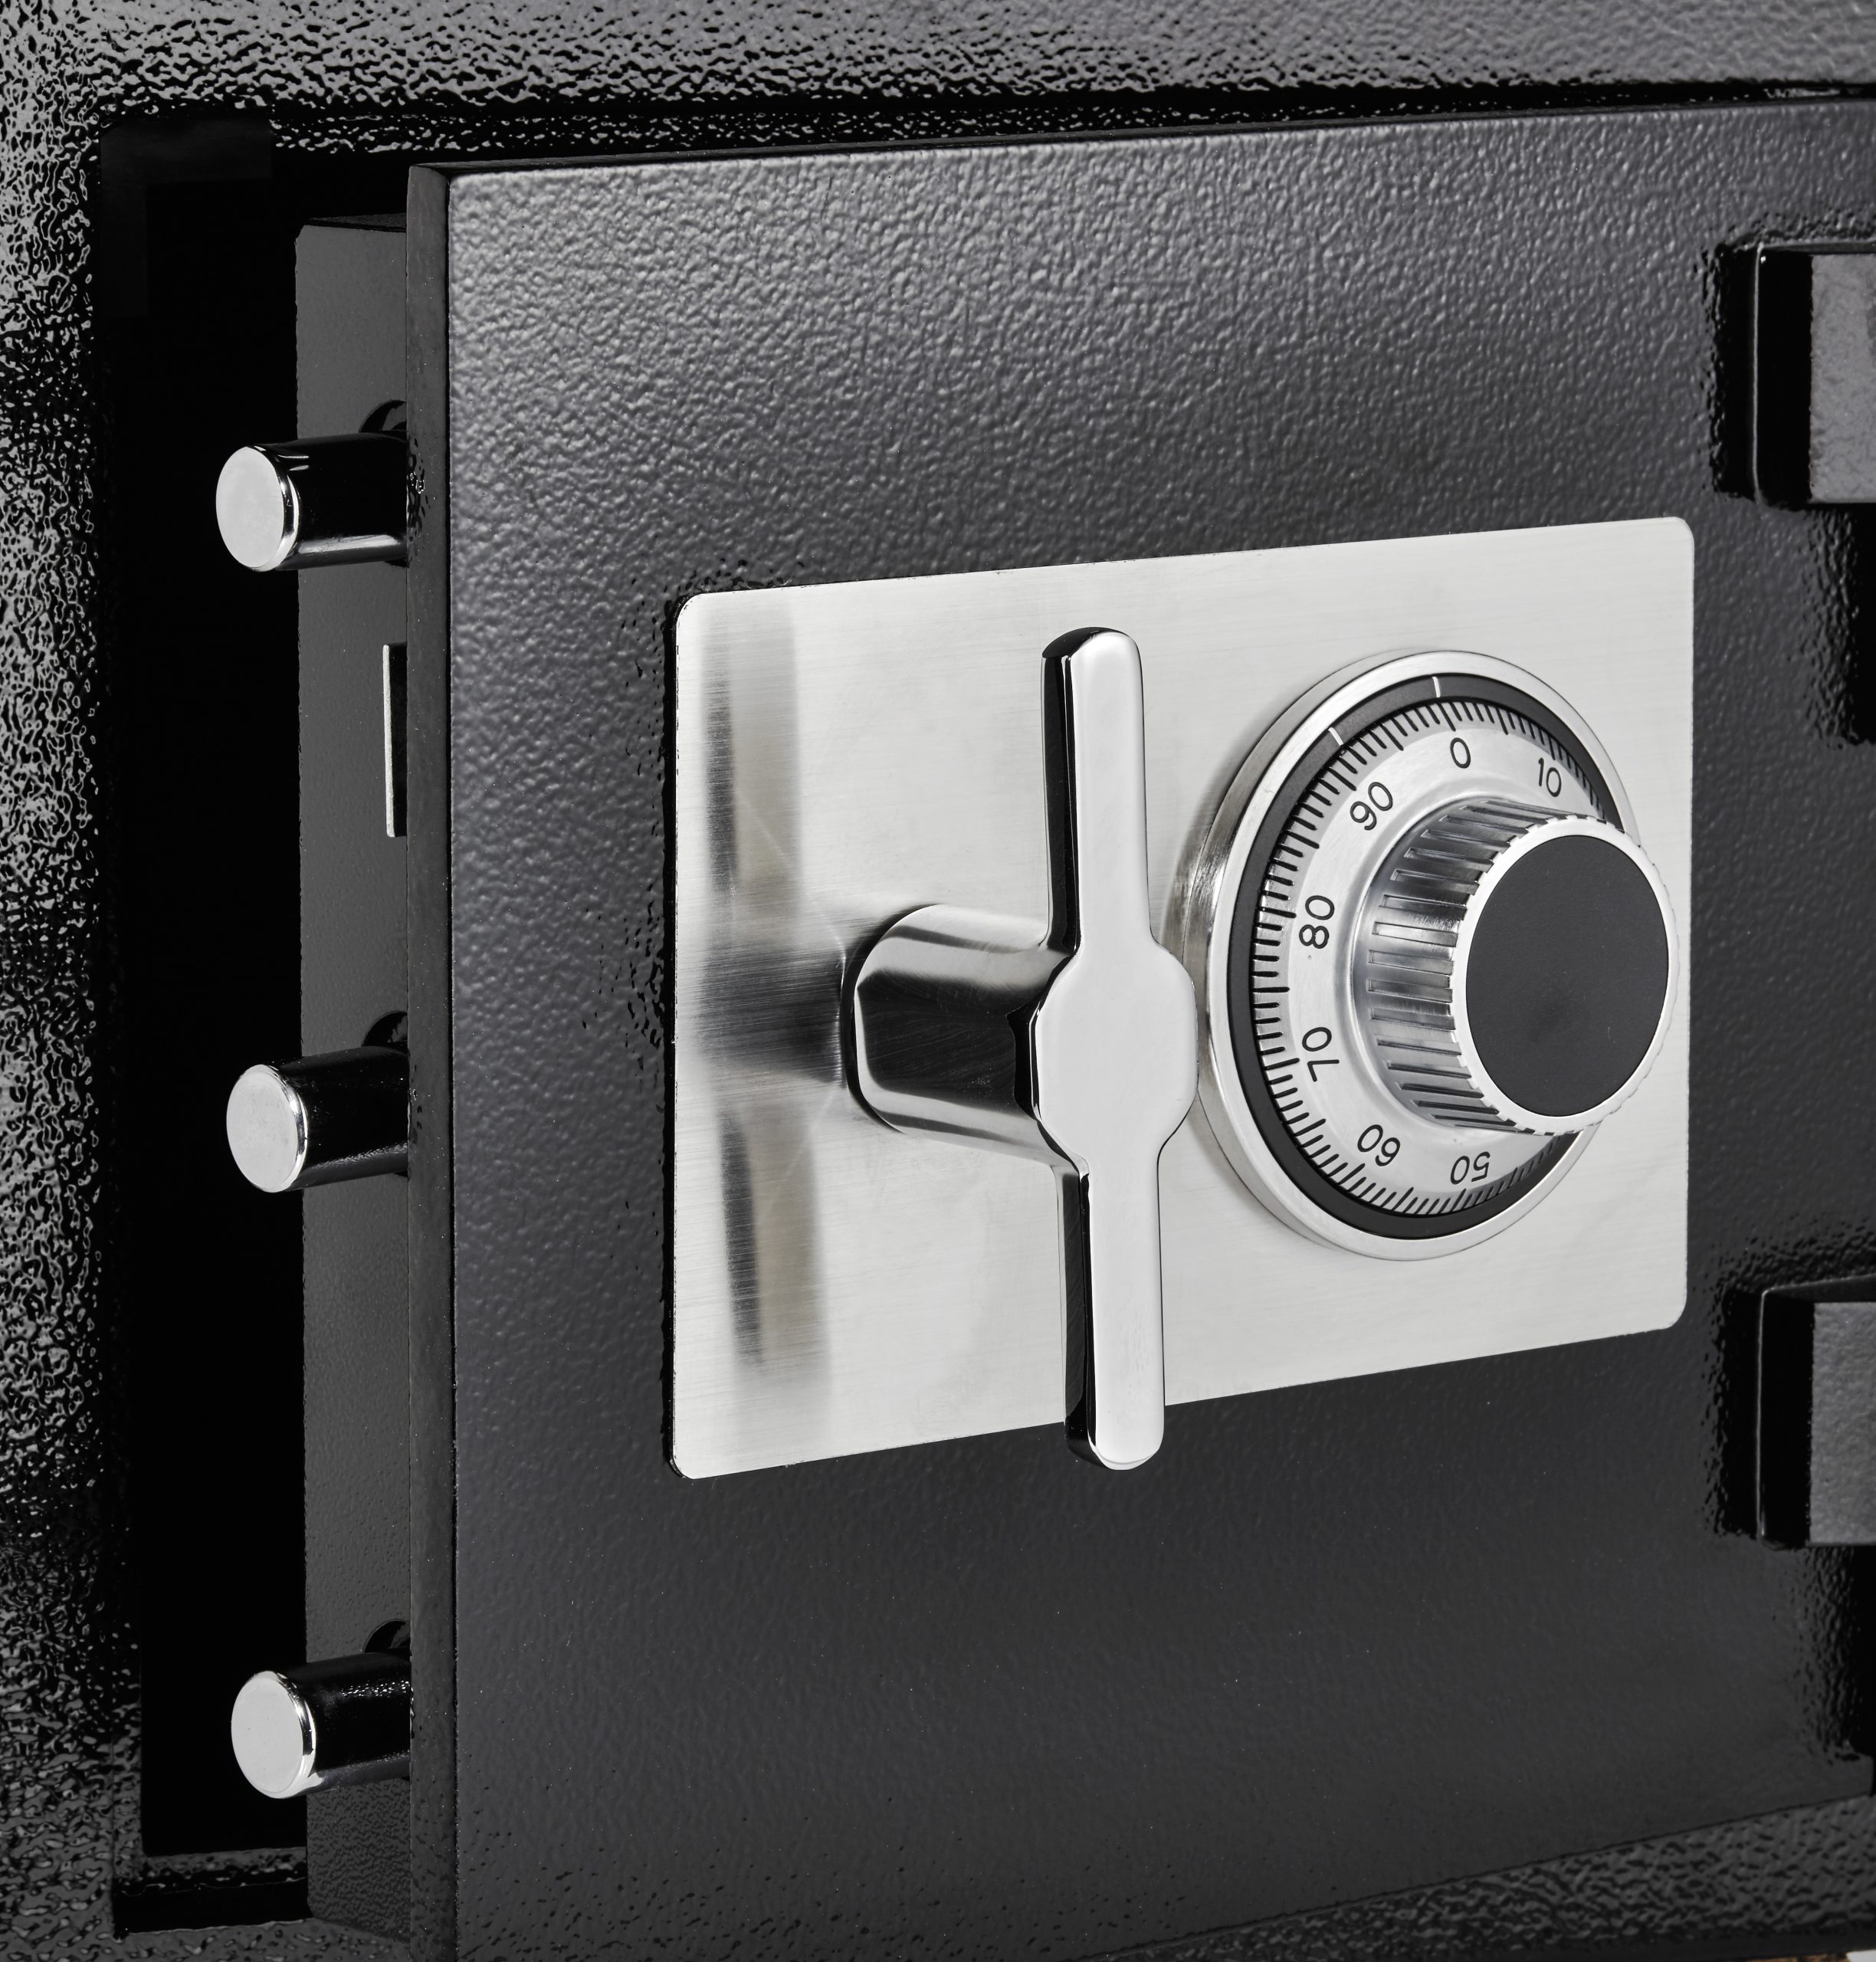 Rotating Drop Slot Combination Lock Office Safe for Cash